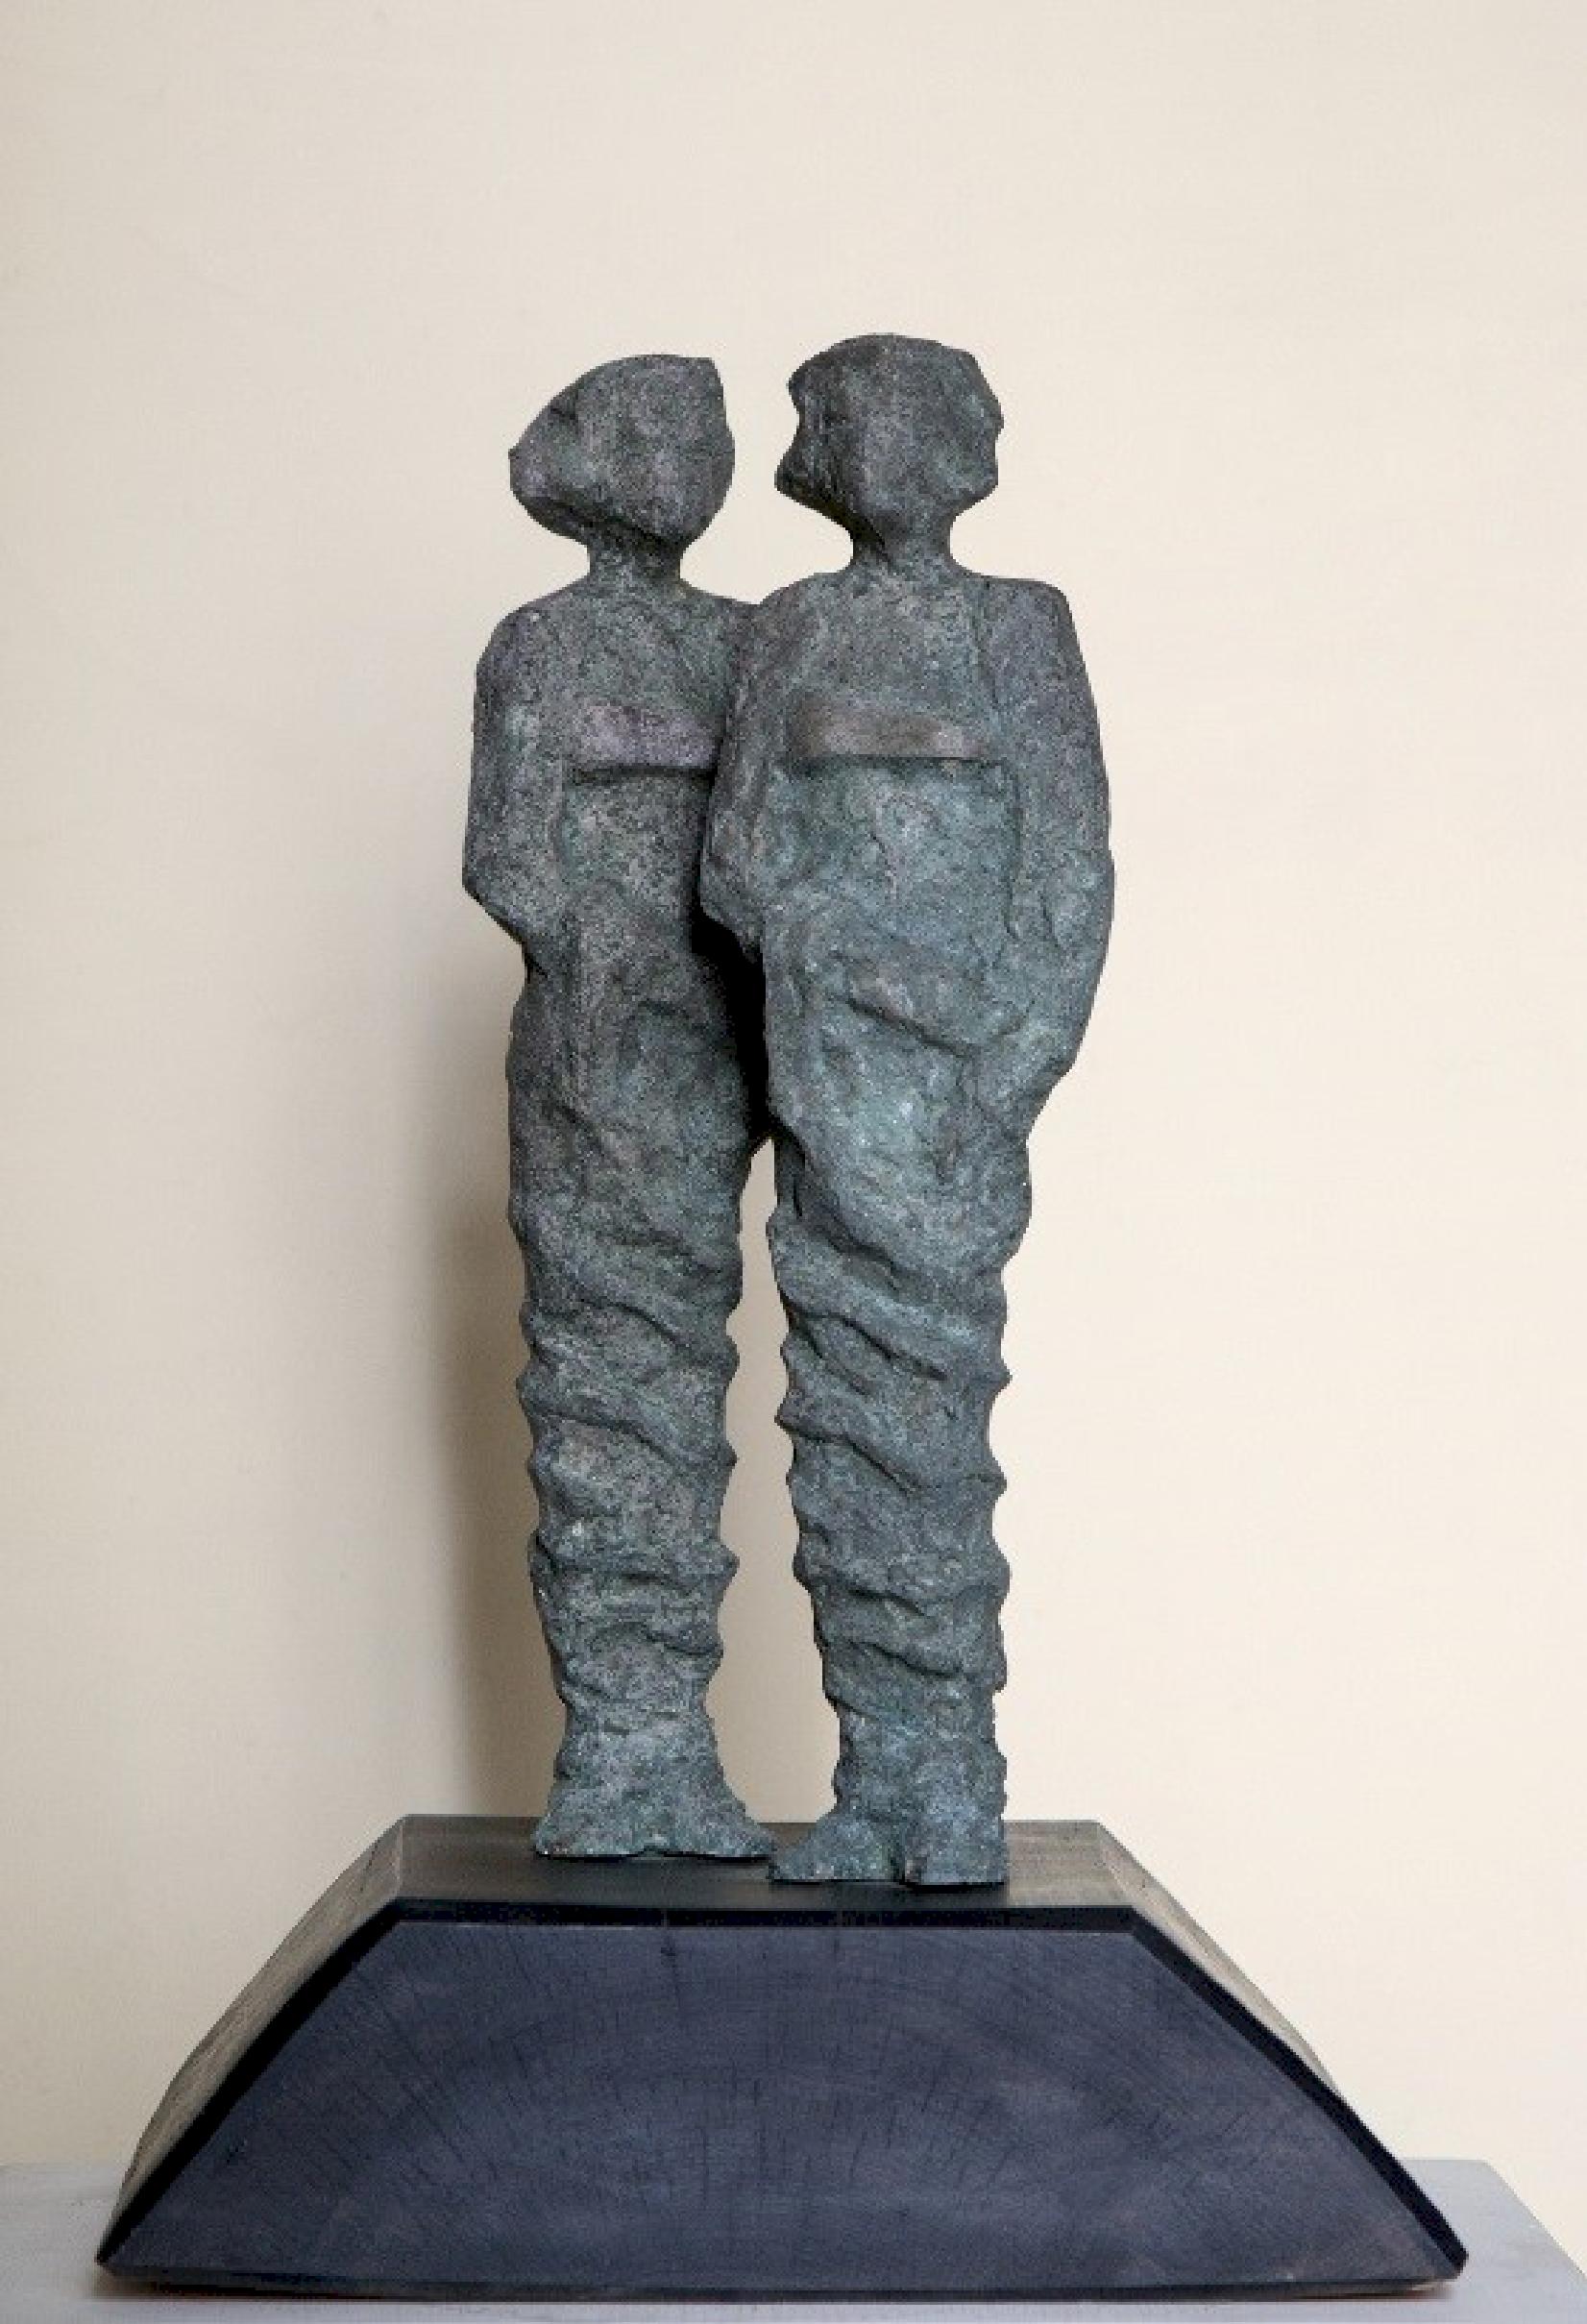 "Sisters" Bronze Sculpture 14" x 6" x 4" inch by Sarkis Tossonian		

Sarkis Tossoonian was born in Alexandria in 1953. He graduated from the Faculty of Fine Arts/Sculpture in 1979. He started exhibiting in individual and group exhibitions in